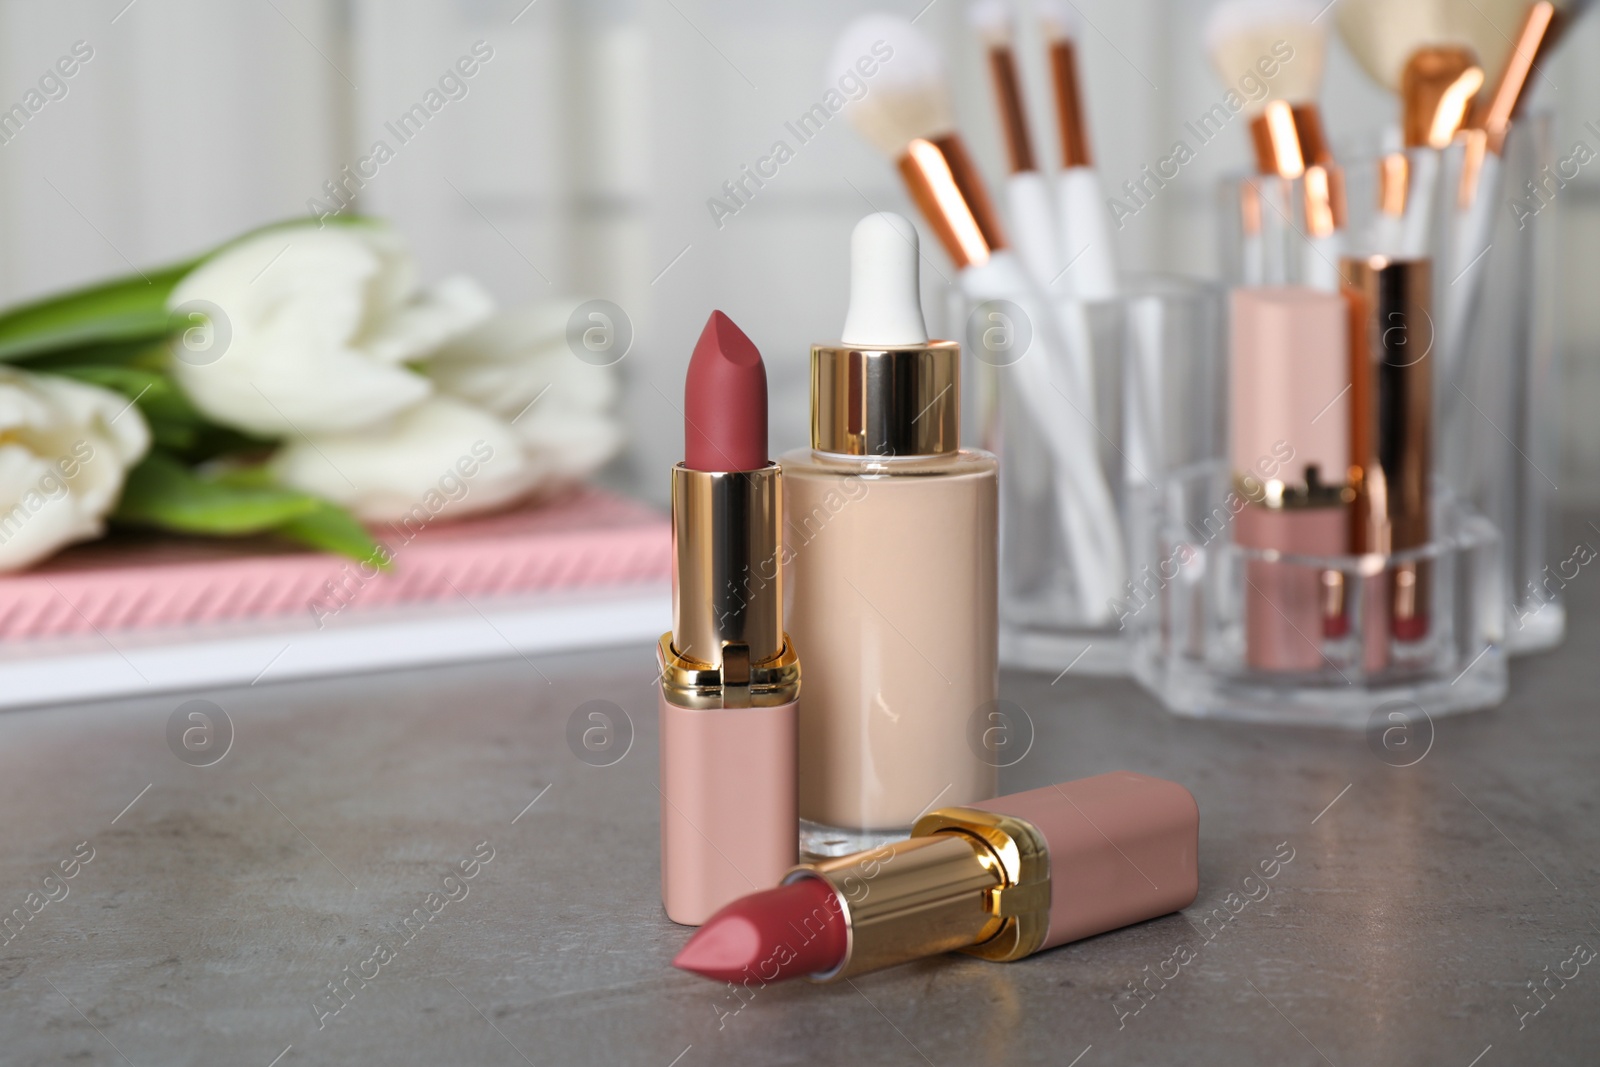 Photo of Decorative cosmetic products and makeup brushes on grey table